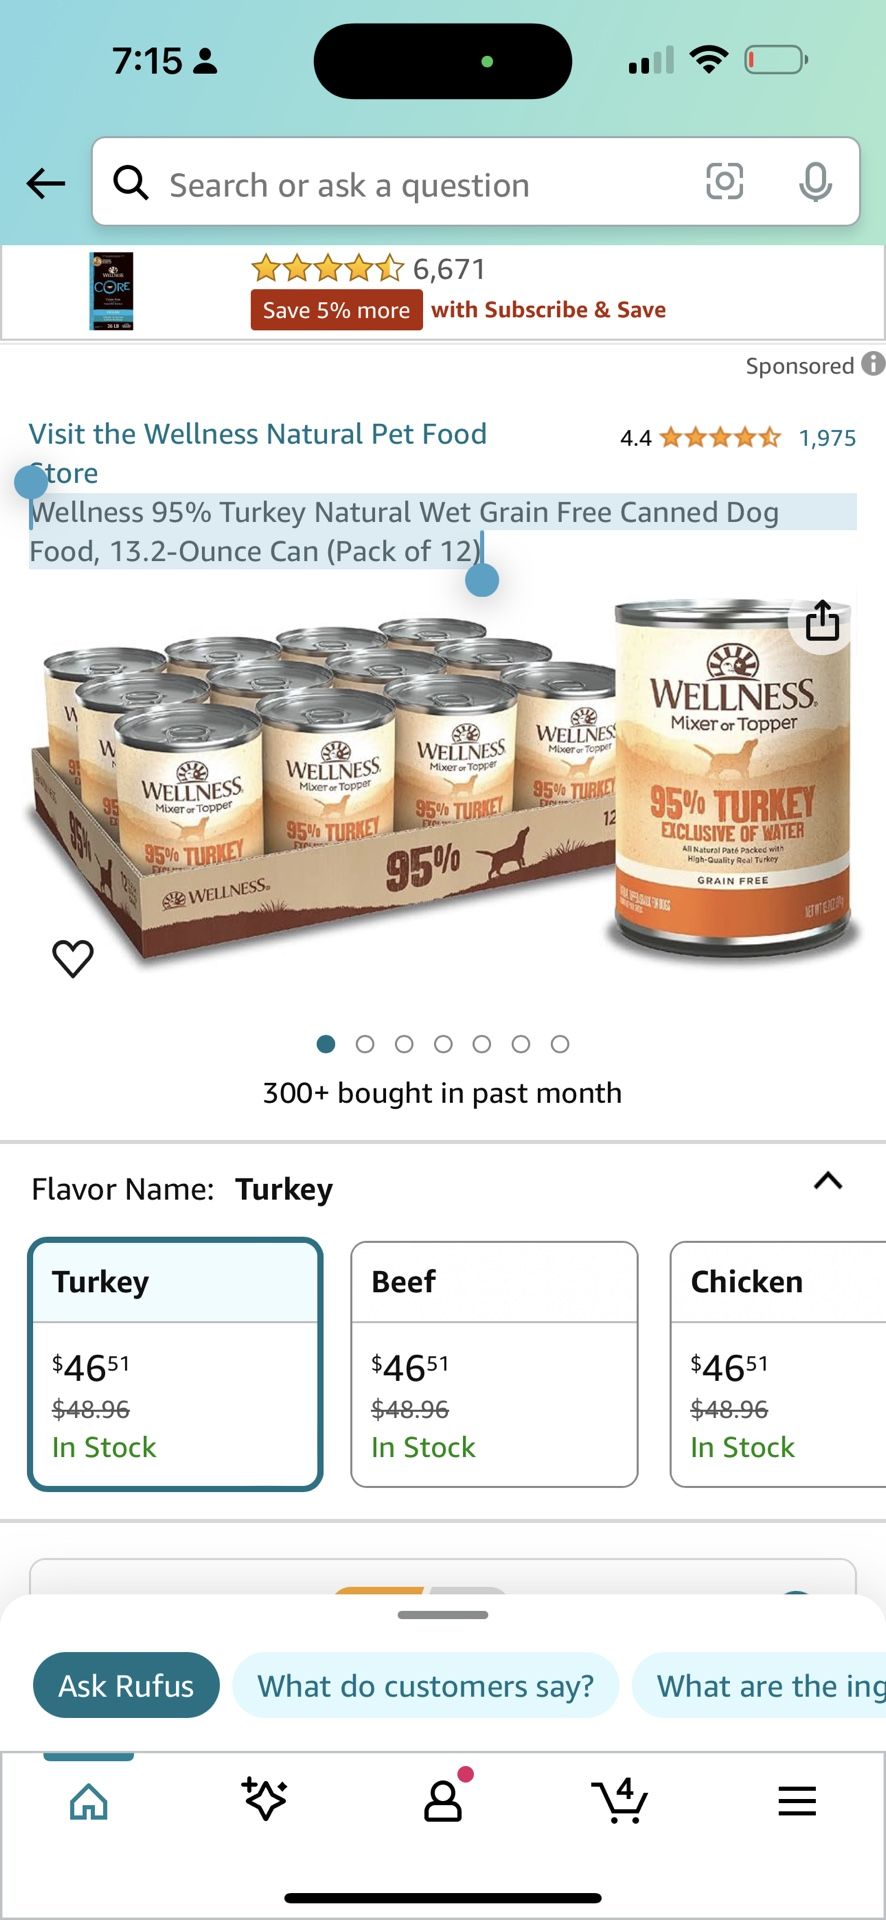 Wellness 95% Turkey Natural Wet Grain Free Canned Dog Food, 13.2-Ounce Can (Pack of 12) $30